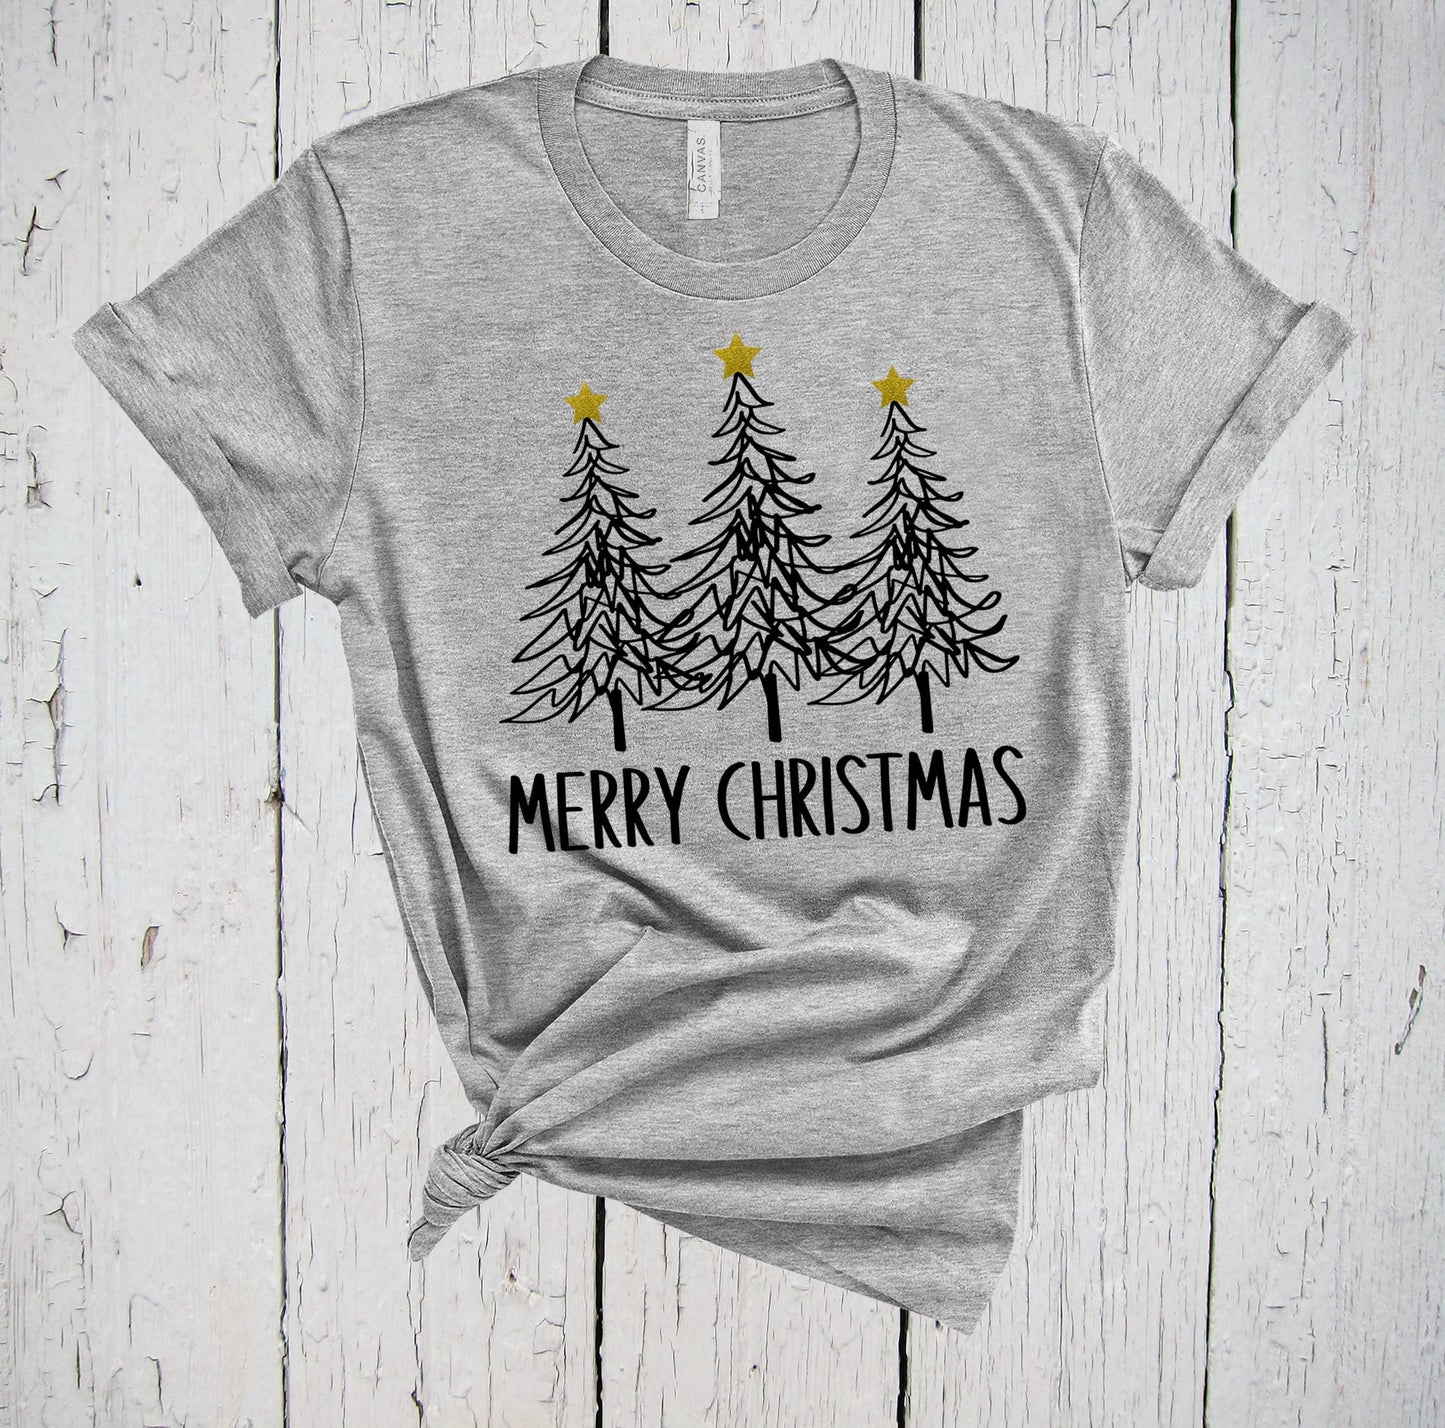 Merry Christmas Pine Trees & Gold Stars Holiday Shirt, Very Cute Women's Tee, Matching Family Xmas Tops for Winter Vacation Get Togethers